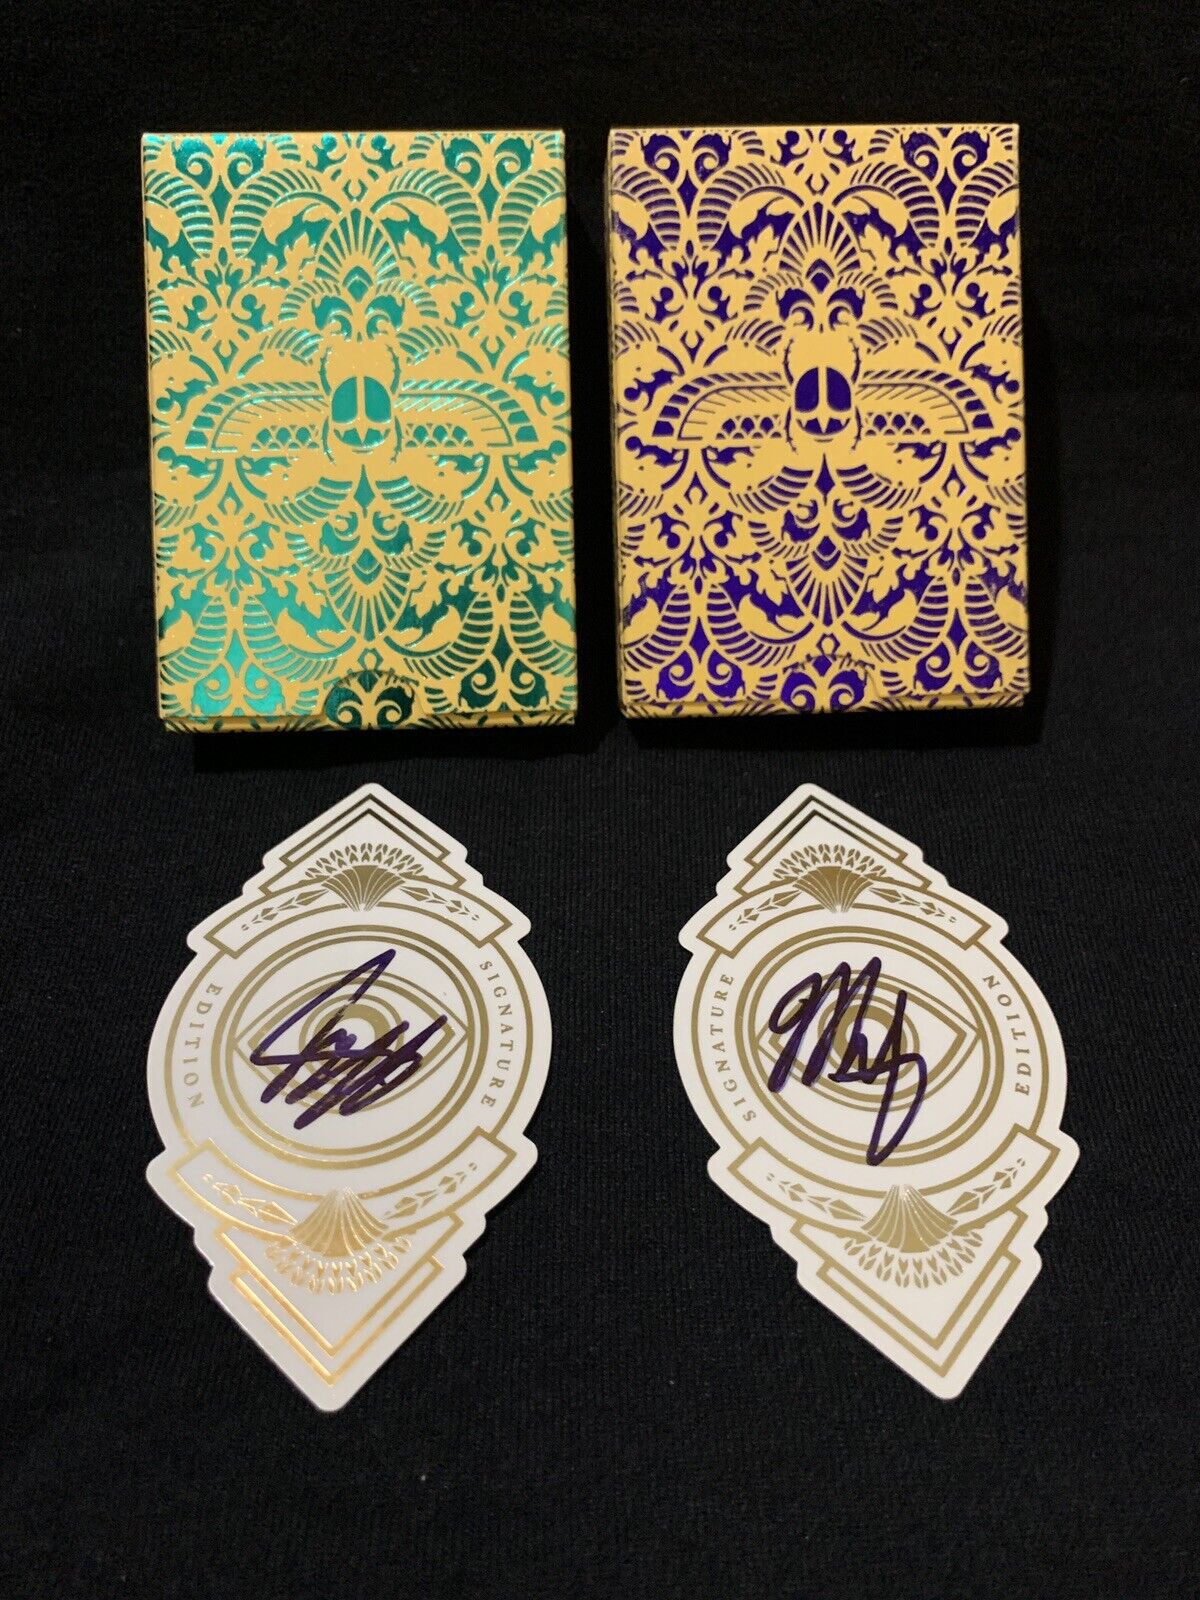 Steve minty Anubis & Osiris V2 Shadow Edition Sold Out In 1 Min